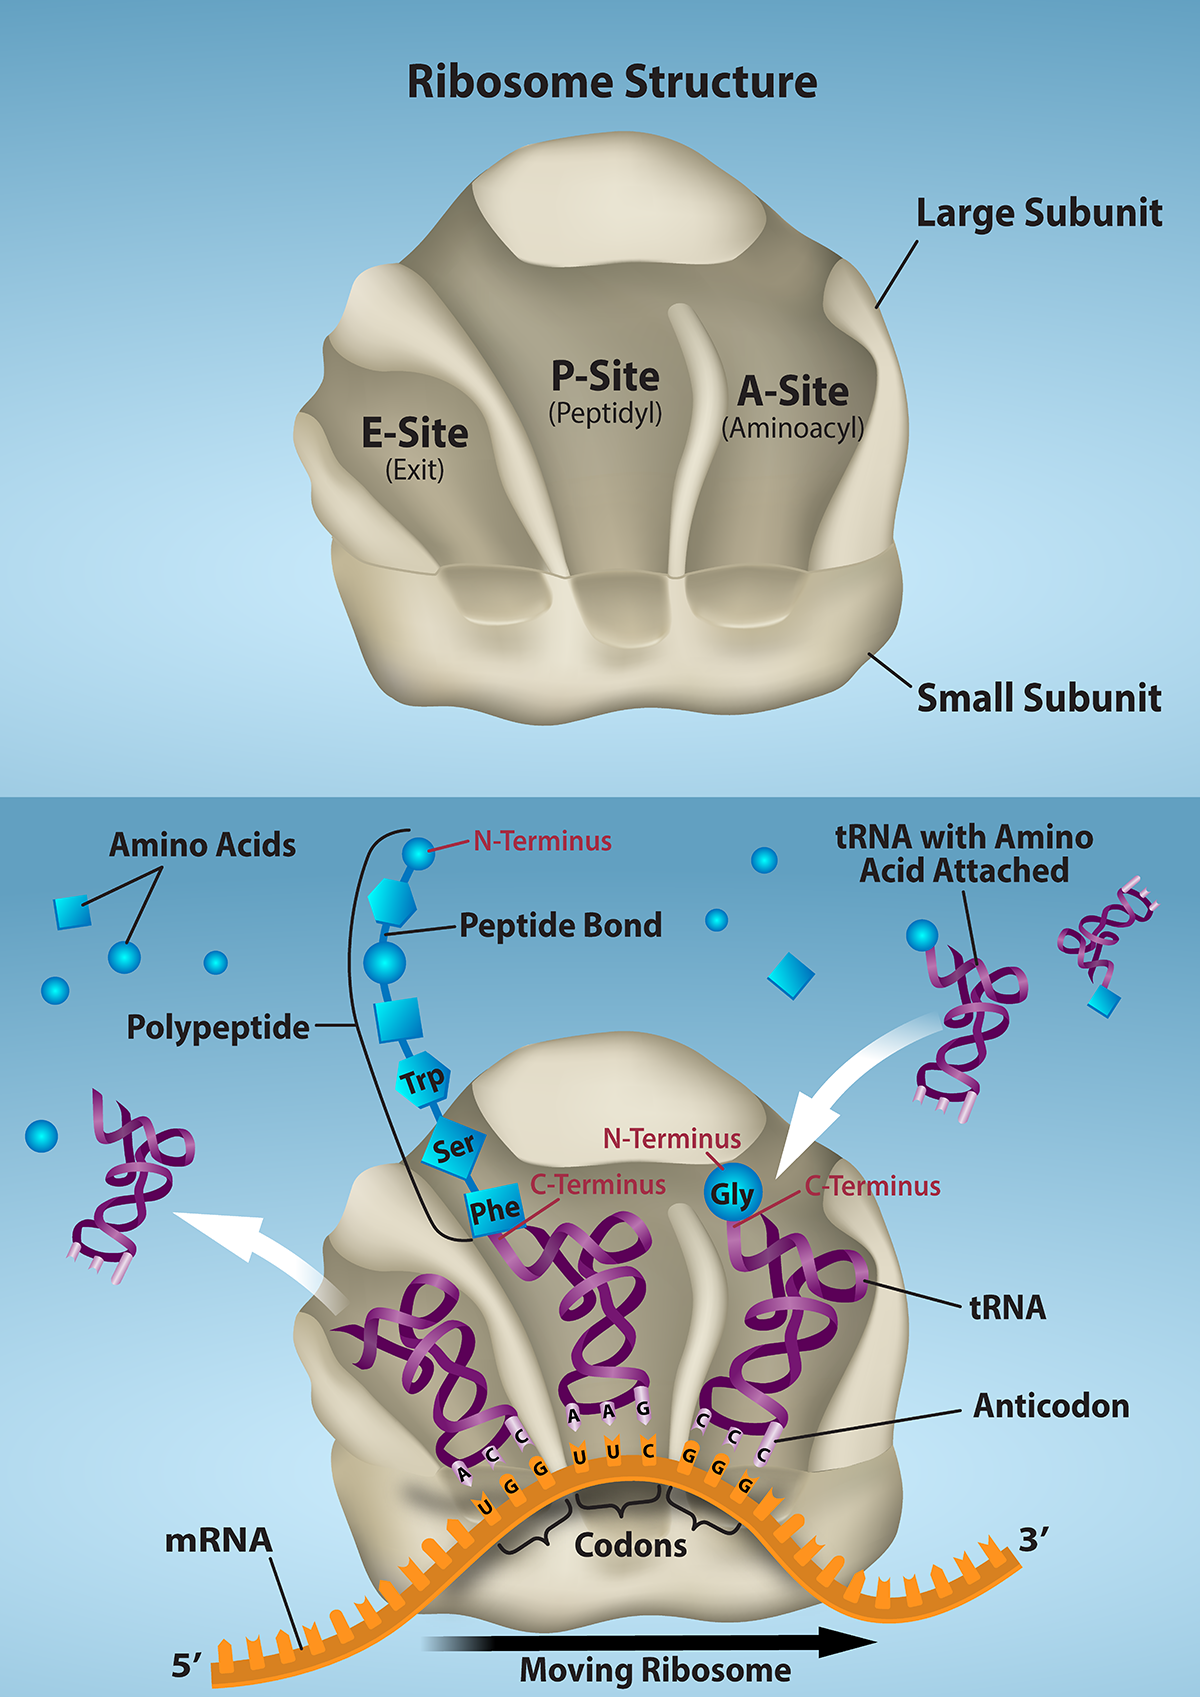 Ribosome structure is shown with the E site, P site, and A site.  As ribosomes move along m R N A, t R N As with amino acides bind to the sites. The polypeptide is assembled at the P site, and the empty t R N A exits from the E site.